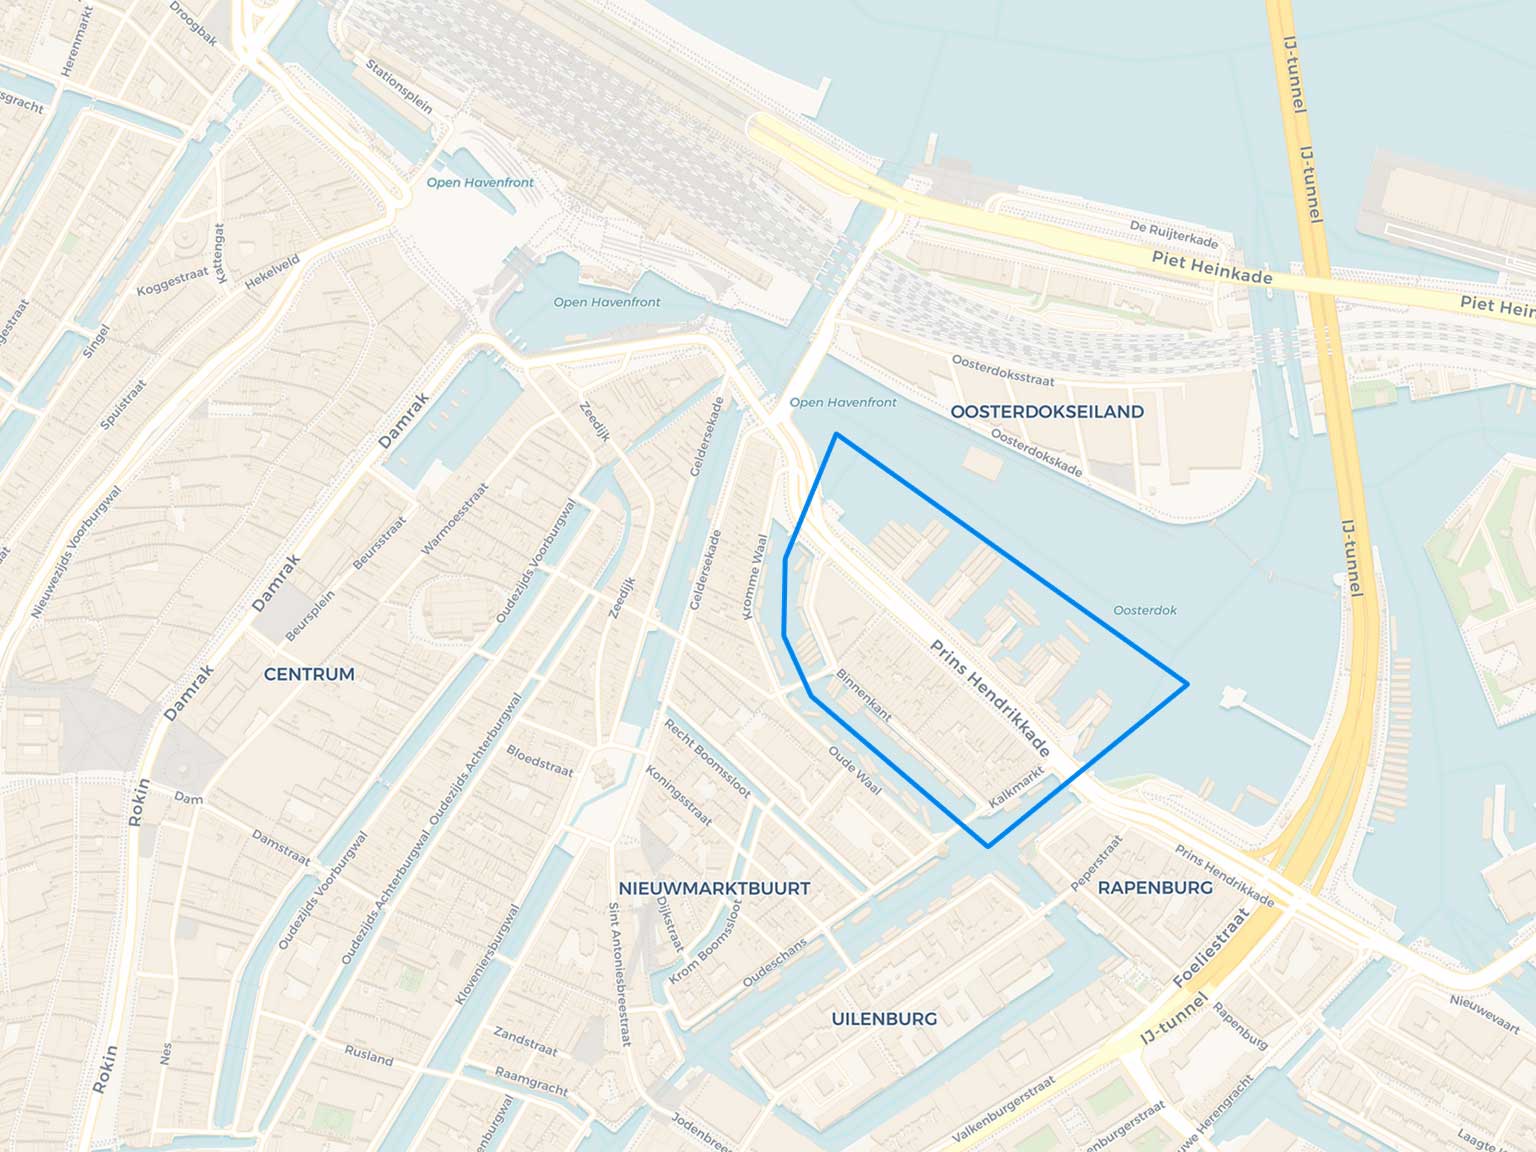 Waalseiland, Amsterdam, outlined on the current map